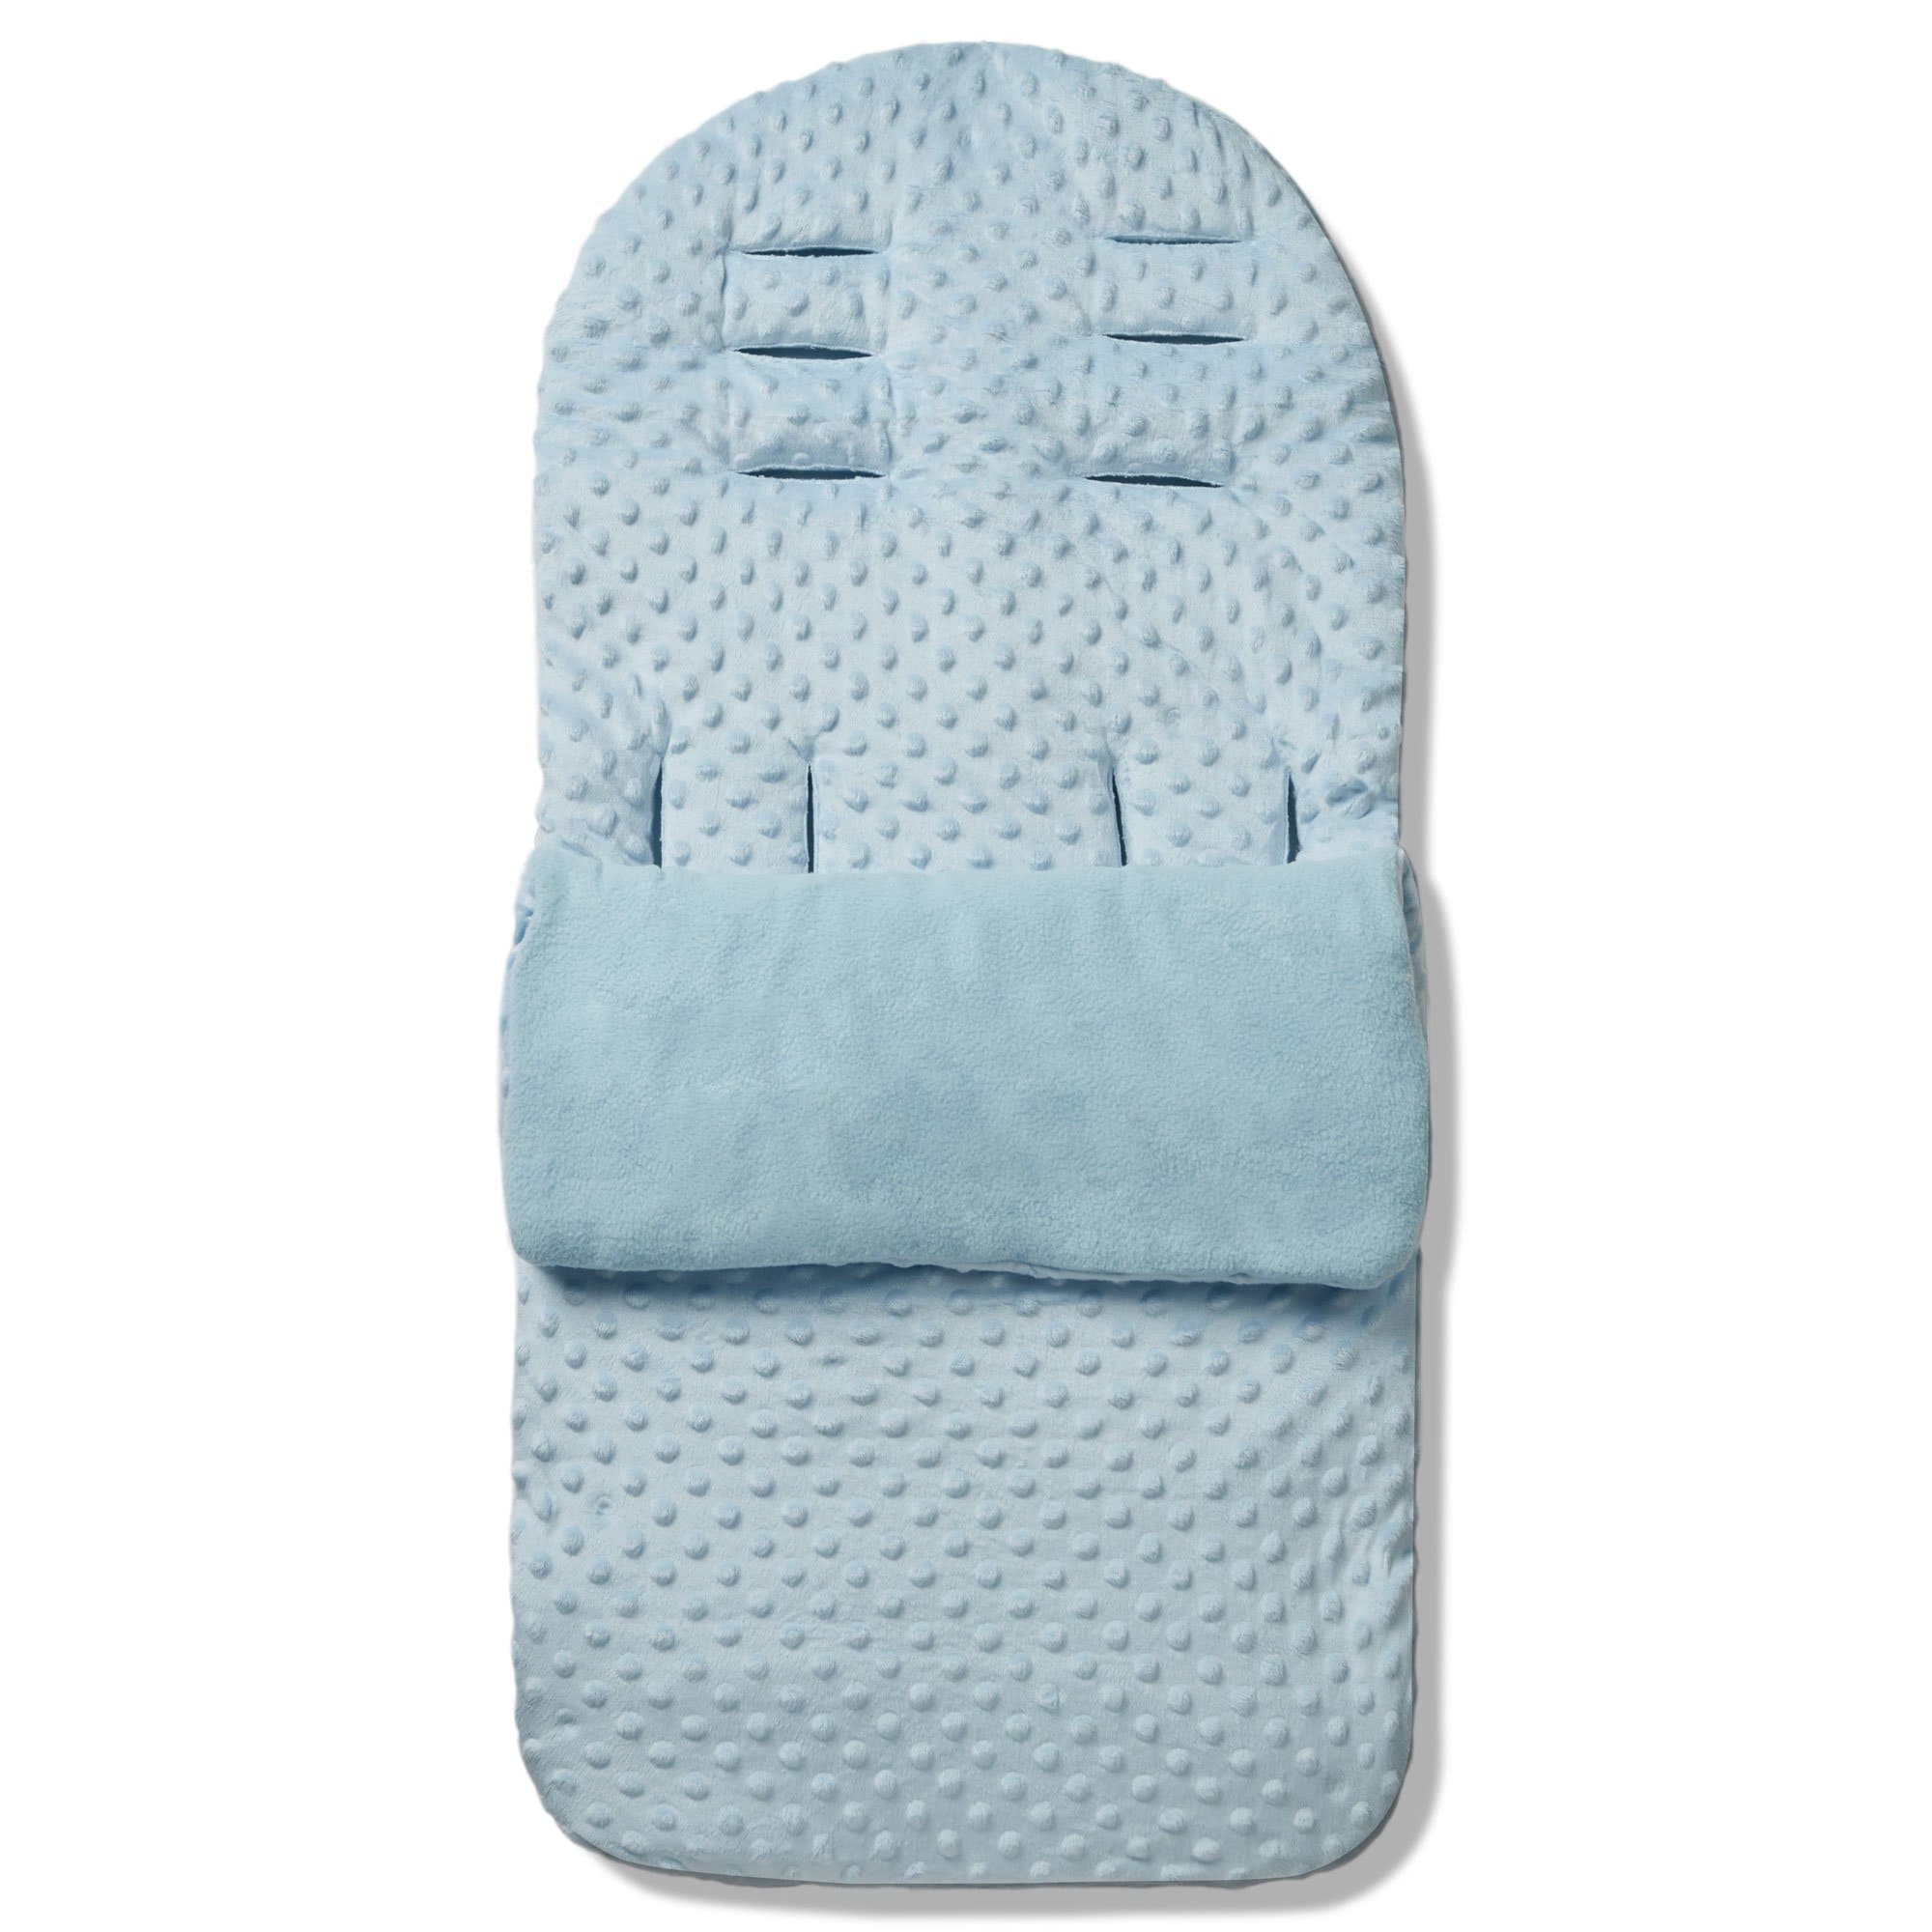 Dimple Footmuff / Cosy Toes Compatible with Phil & Teds - Blue / Fits All Models | For Your Little One